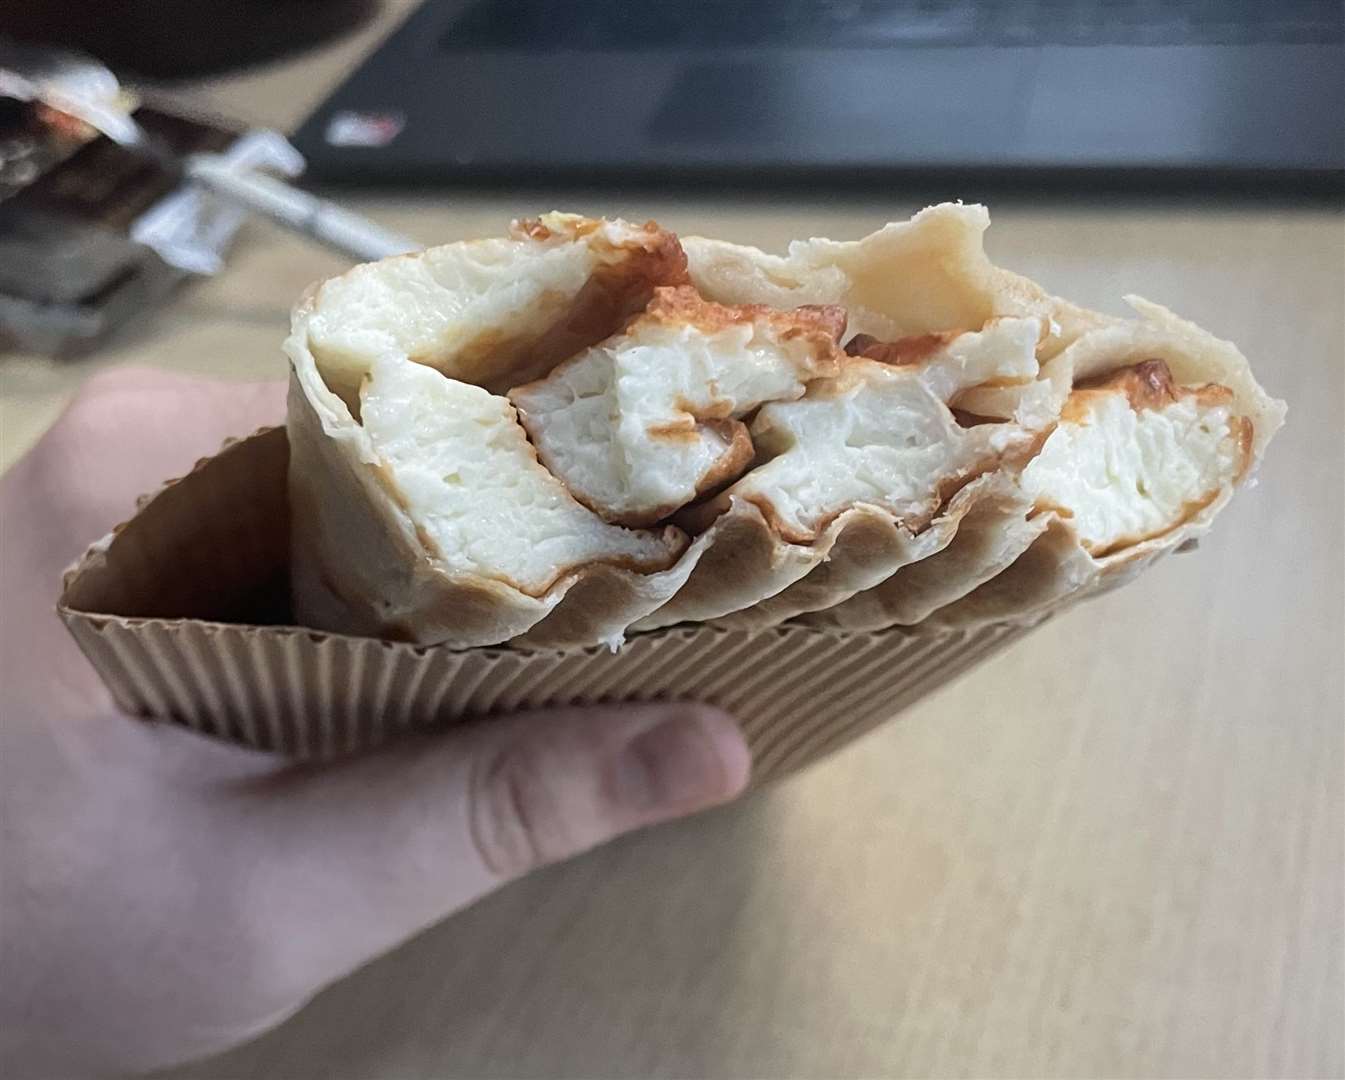 The halloumi wrap from Wingos in Maidstone tasted fishy